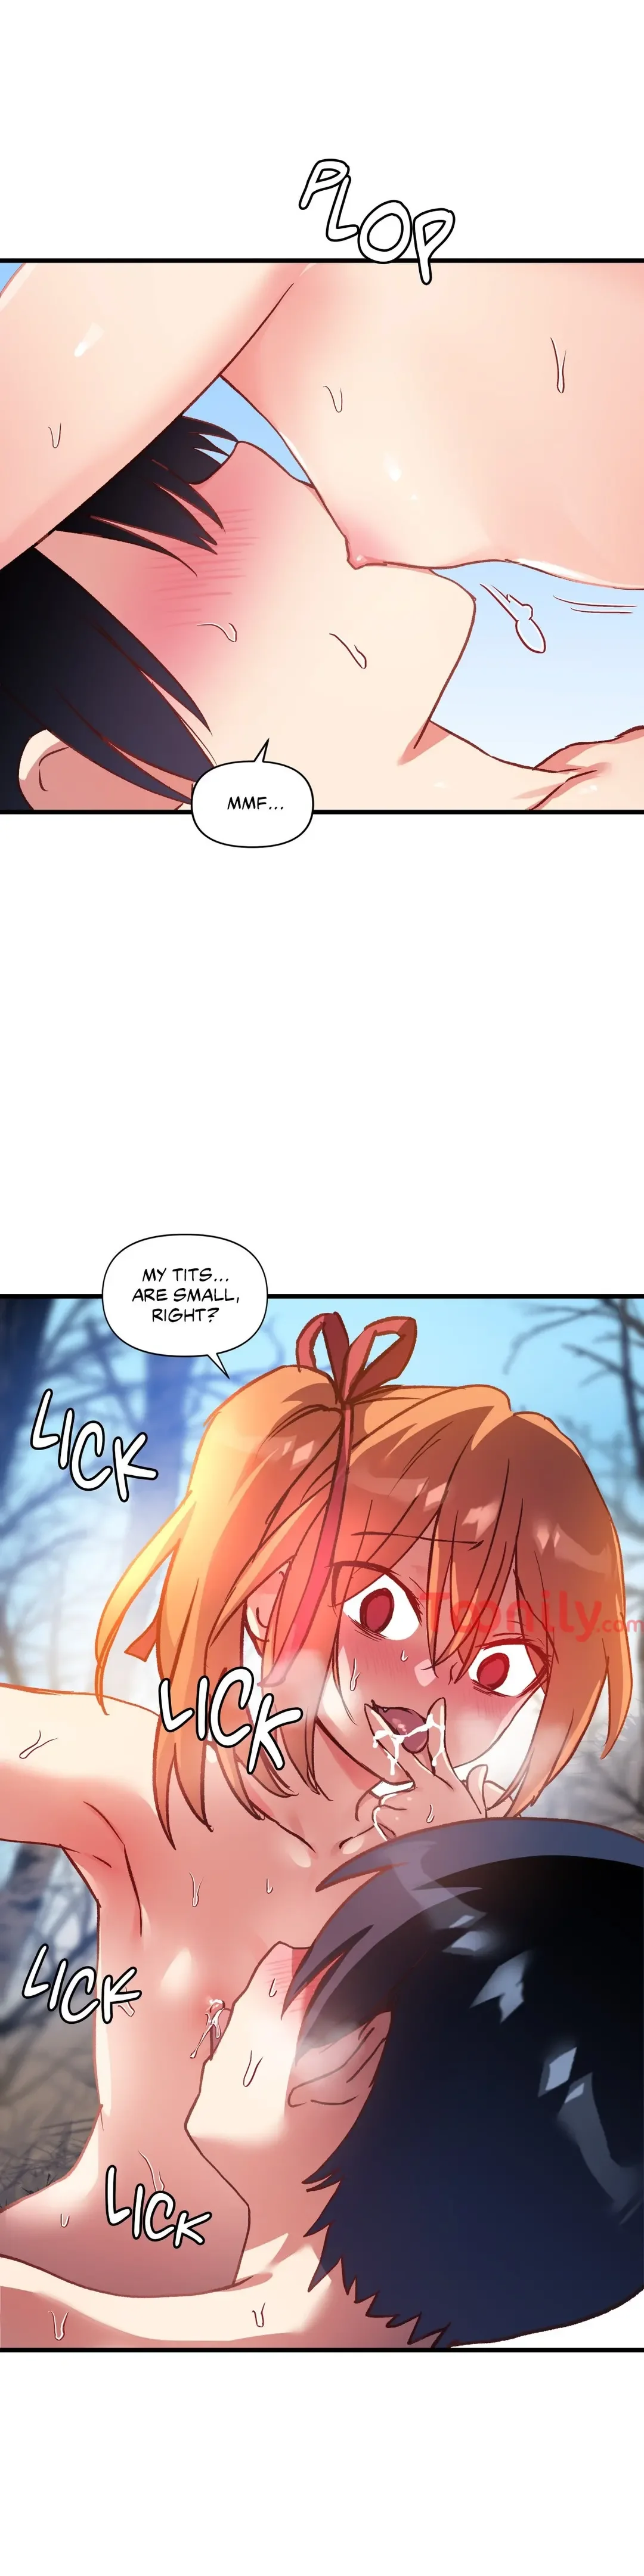 under-observation-my-first-loves-and-i-chap-45-2